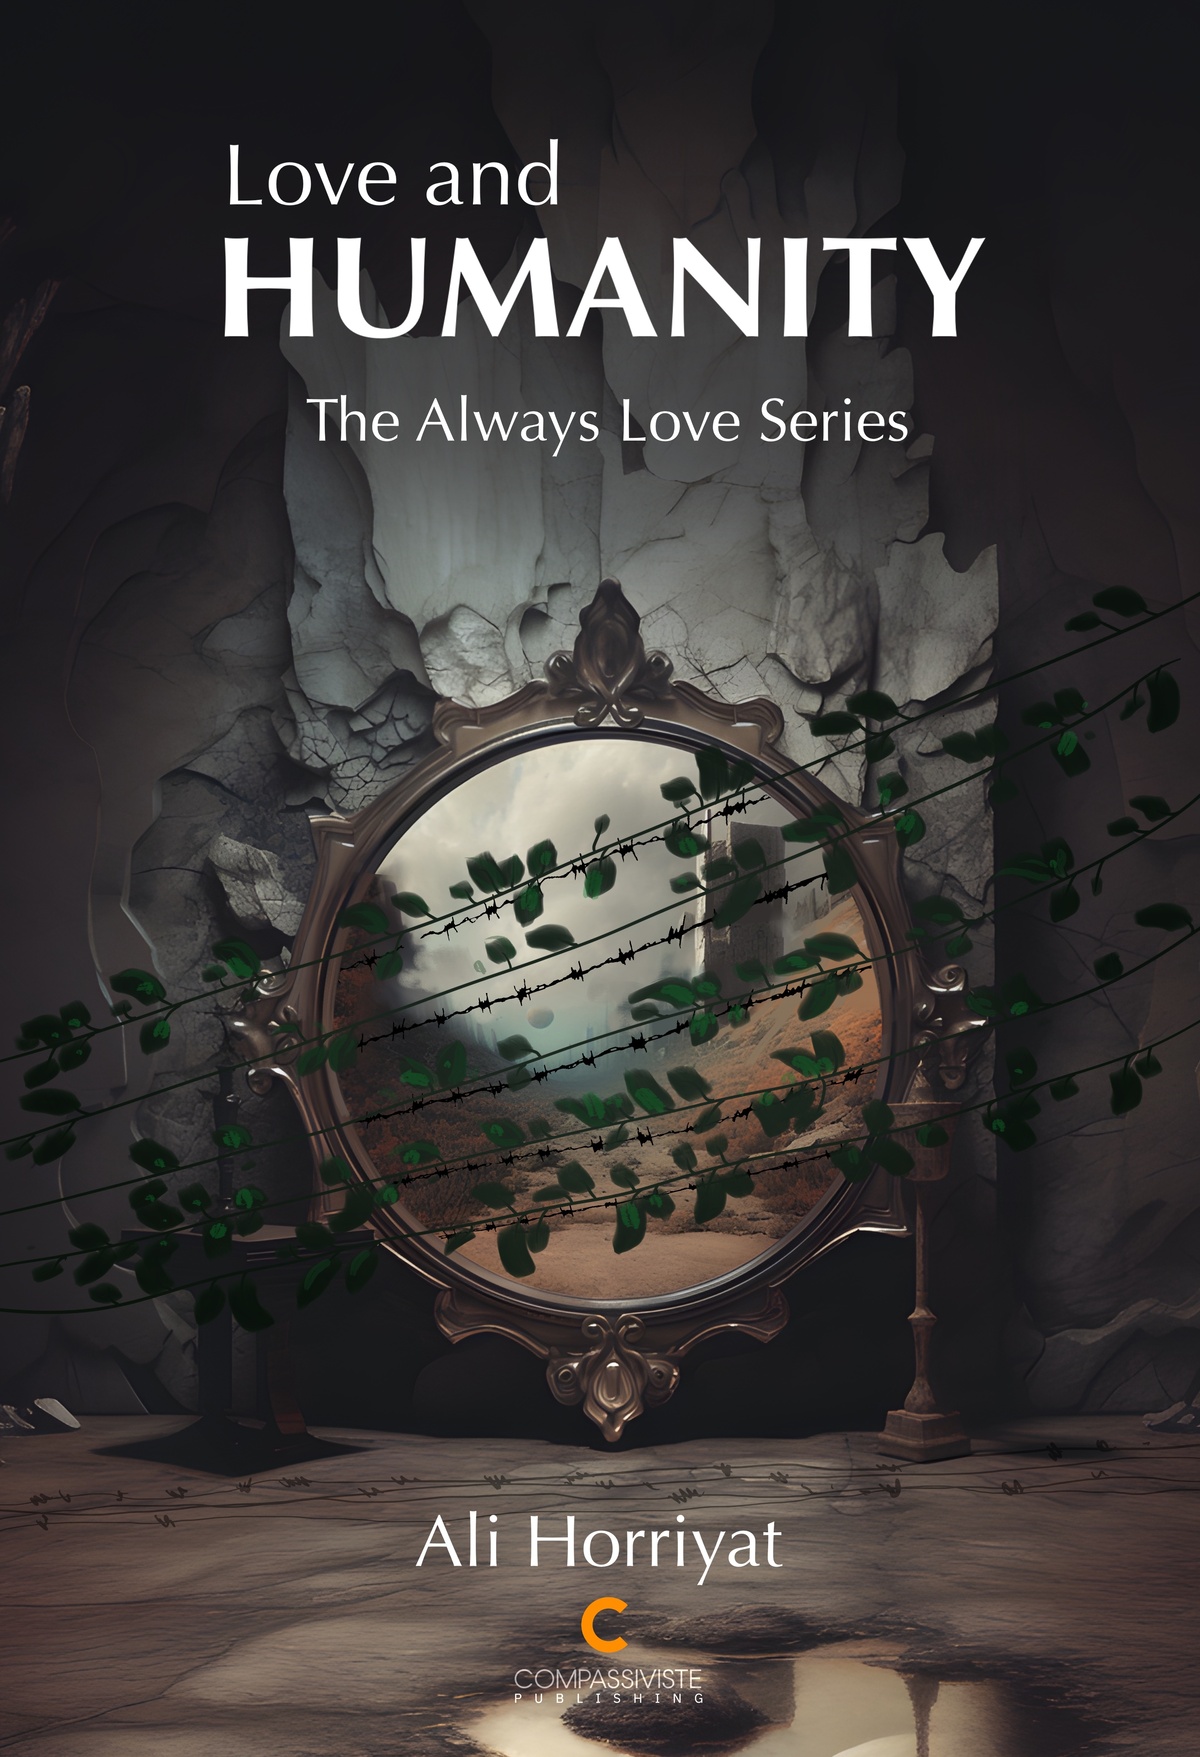 Book cover of Love and Humanity by Ali Horriyat